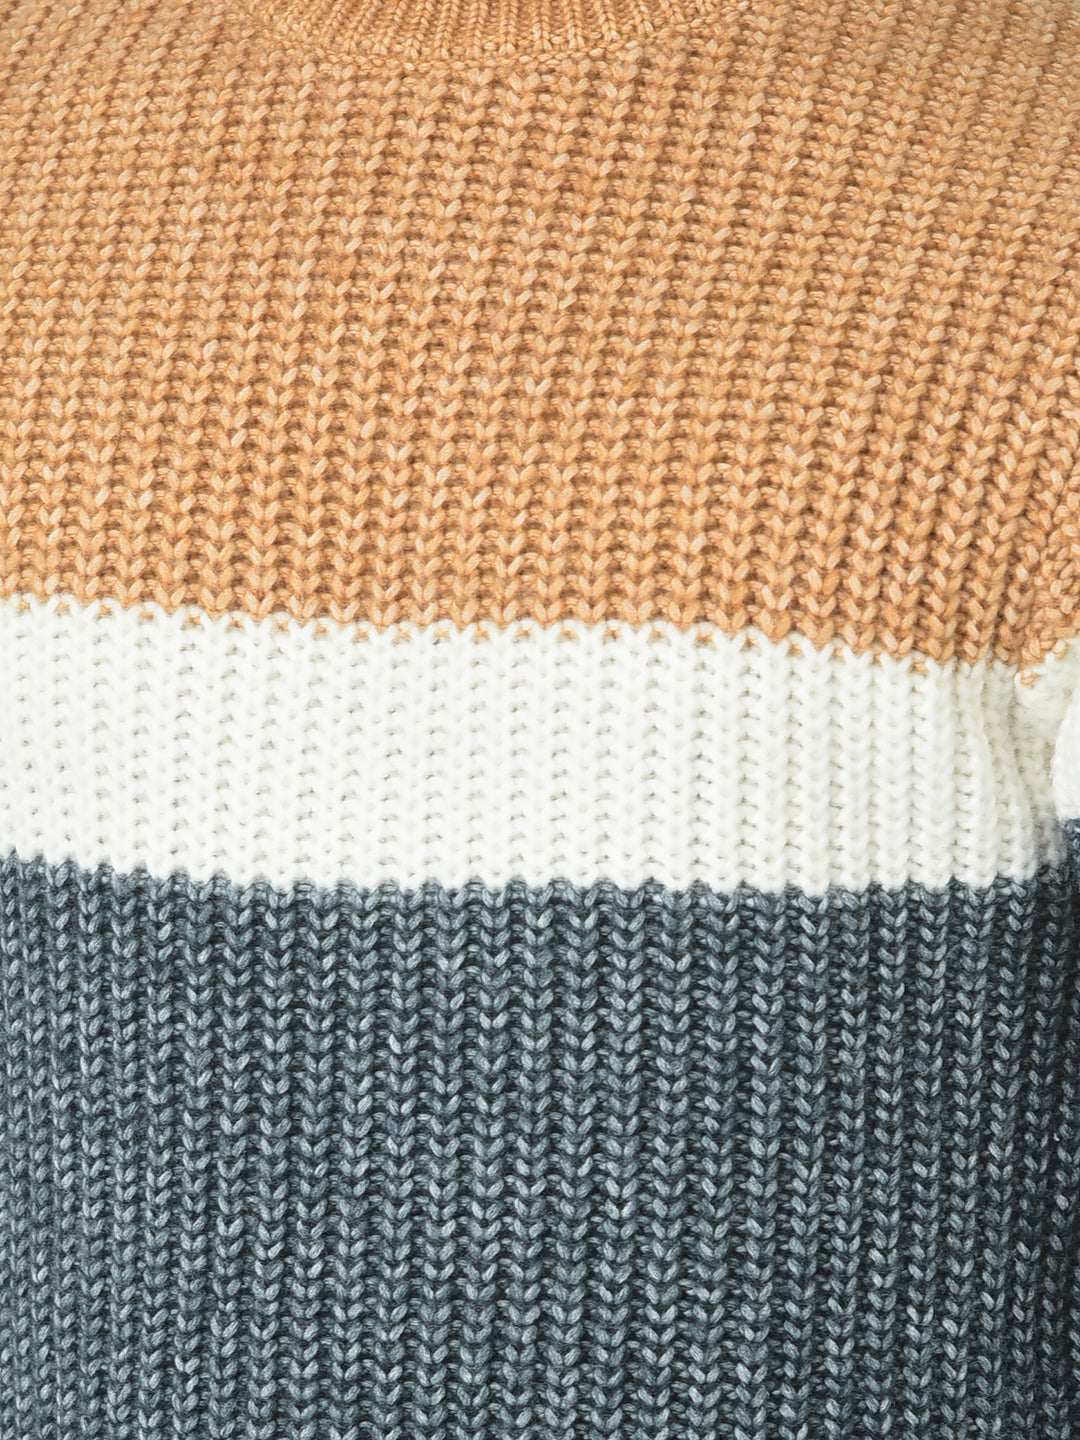  Knitted Mustard Colour-Blocked Sweater